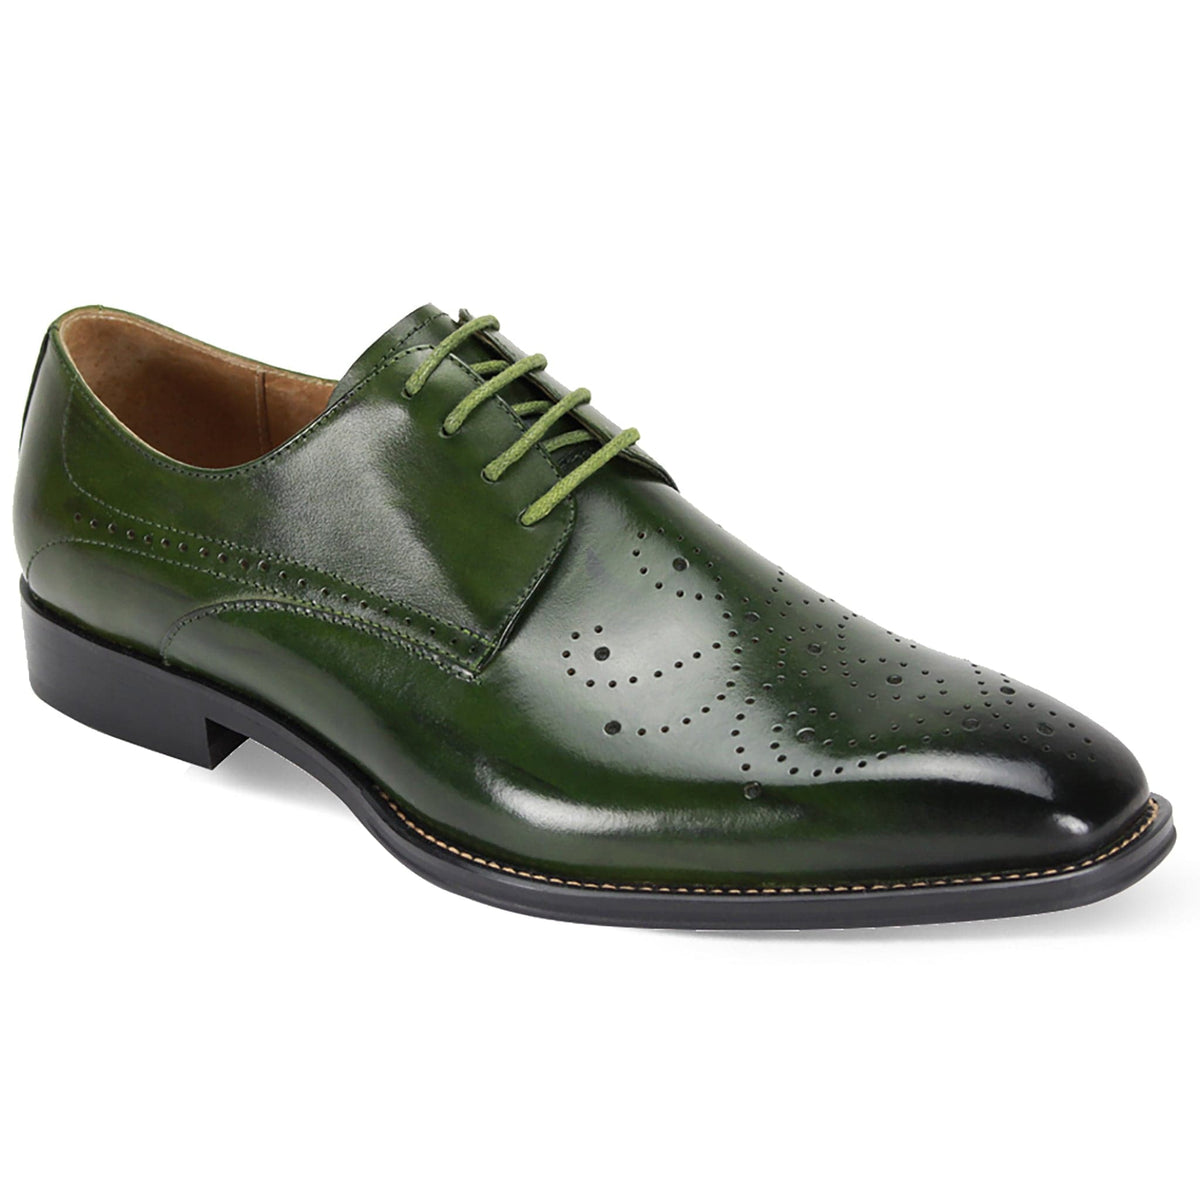 GIOVANNI LEATHER SHOES FT GREEN / 7 GIOVANNI LEATHER SHOES-JOEL